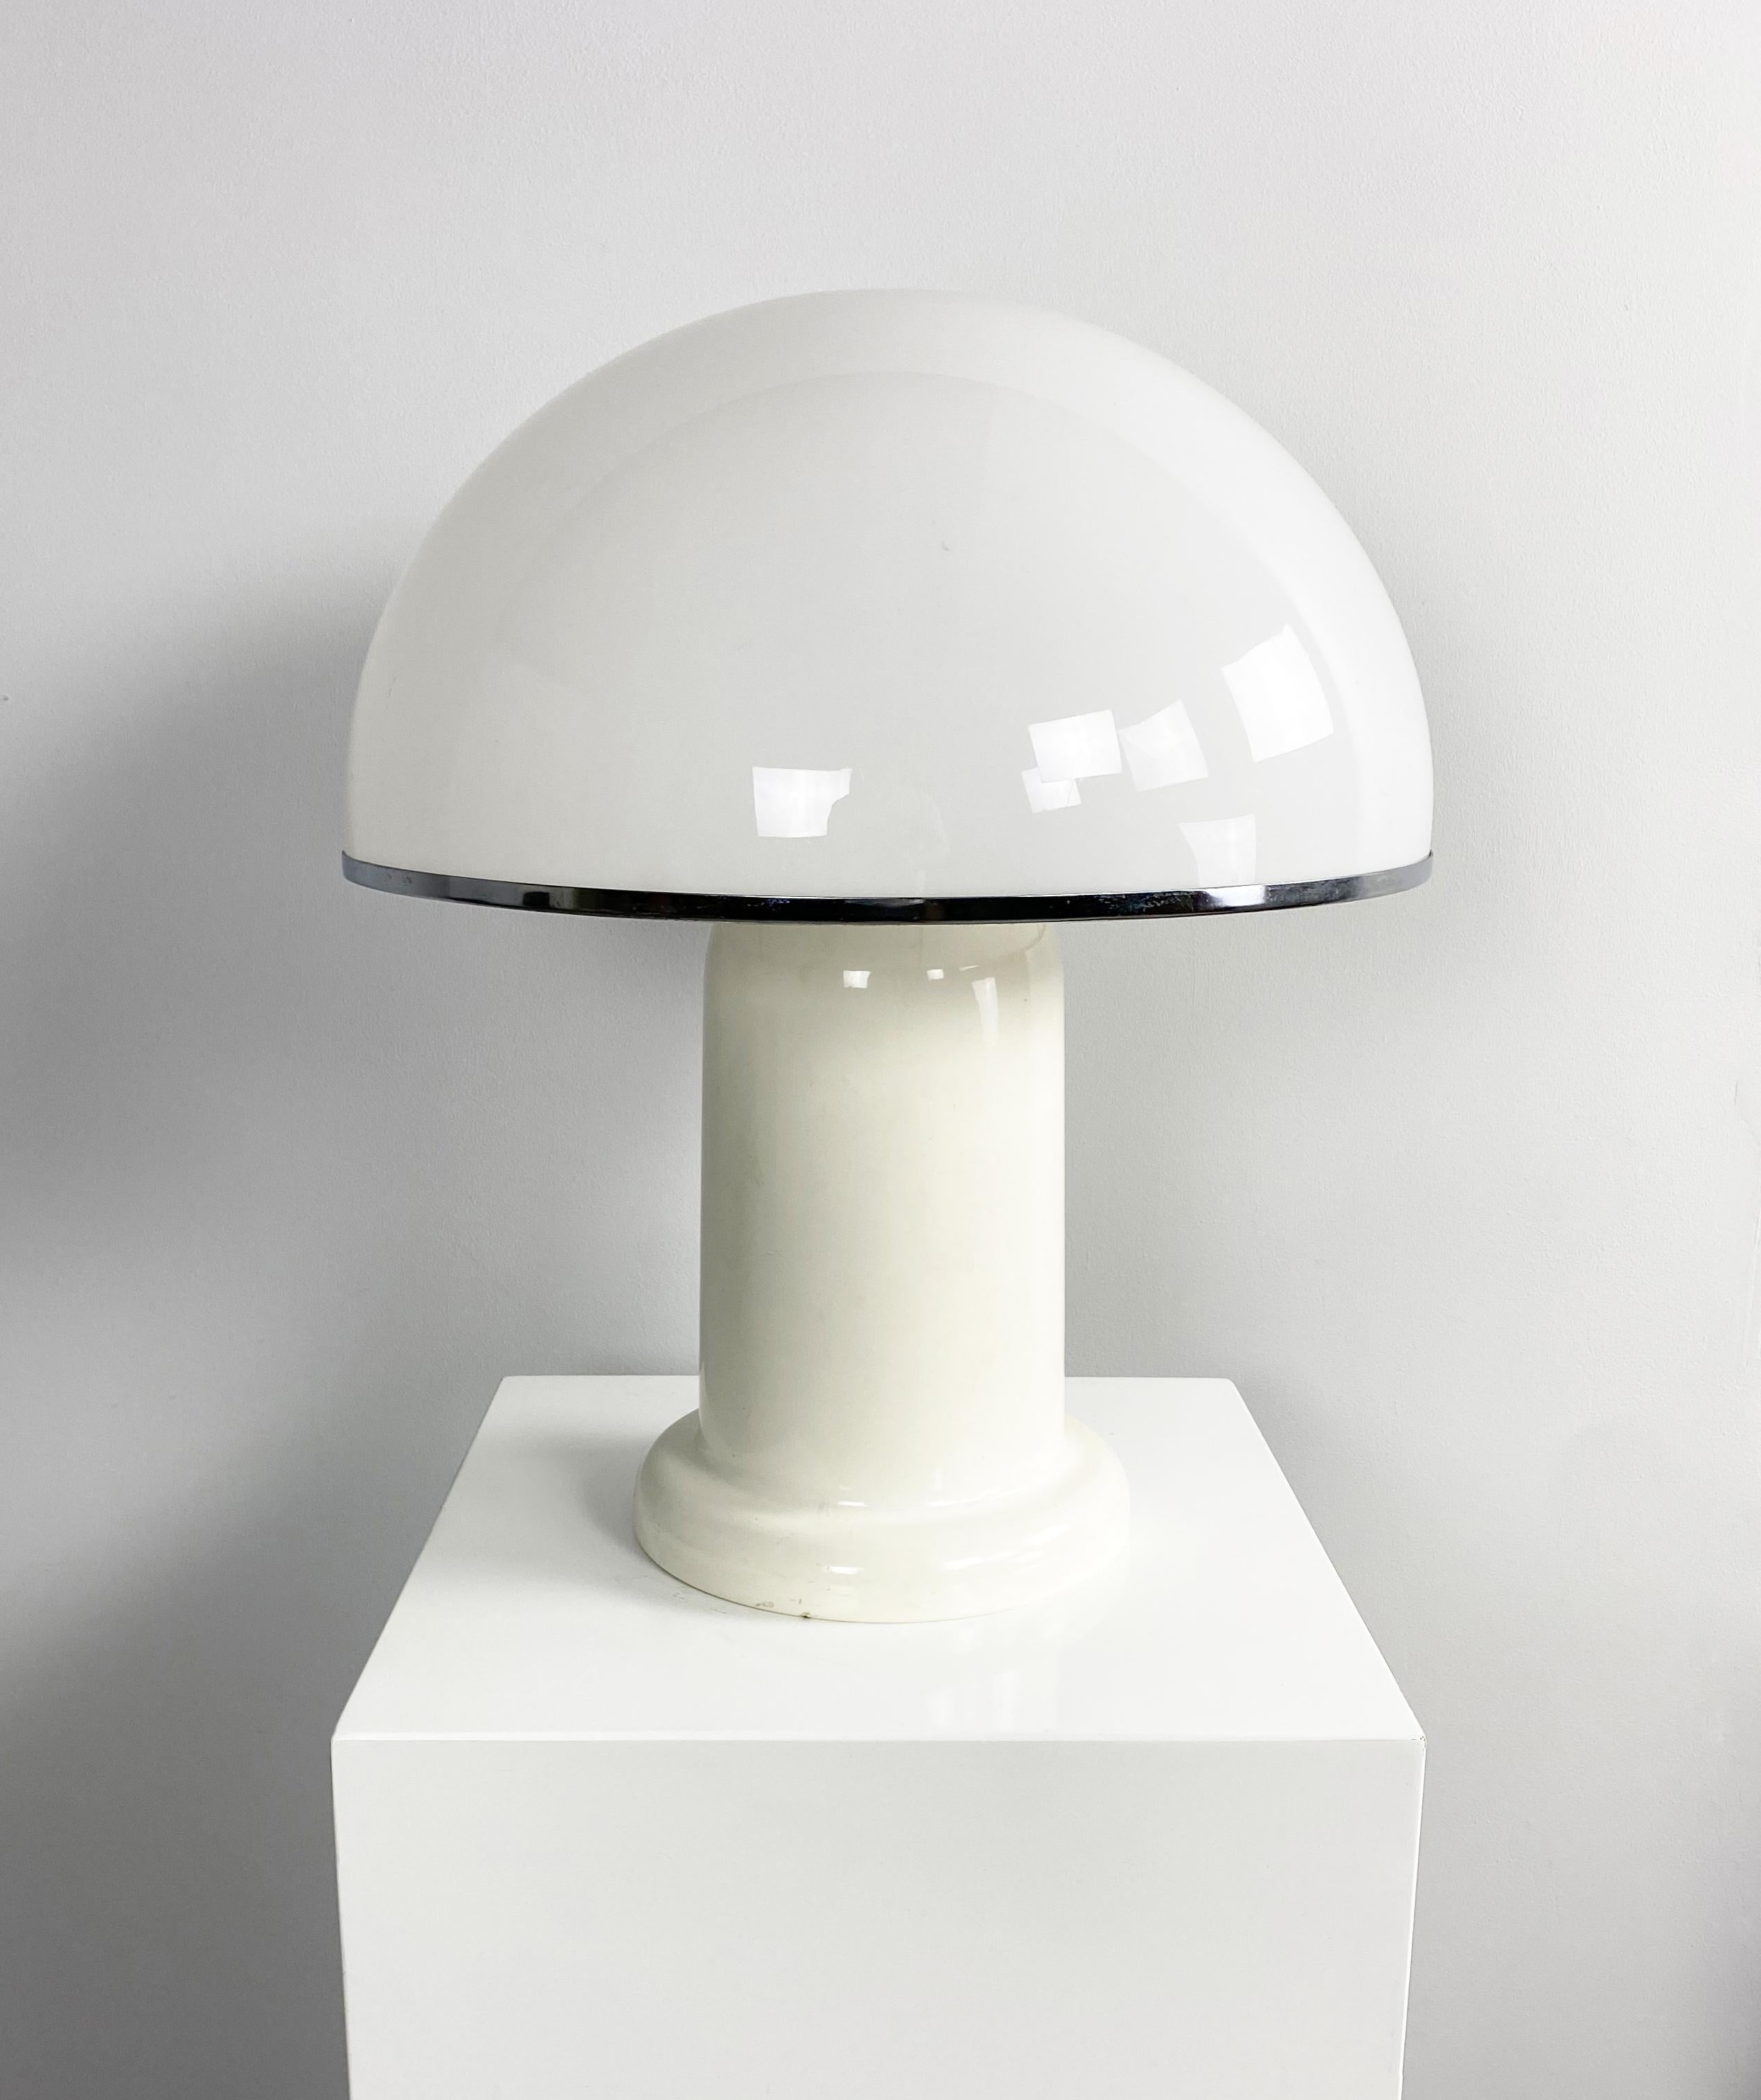 Large Space Age table lamp produced by Groupe Habitat, France, c.1970. Formed from a large plexiglass dome shade on a lacquered aluminium base.

Dimensions (cm, approx): 
Height: 53 
Diameter: 47

Condition: Good condition for year with minor